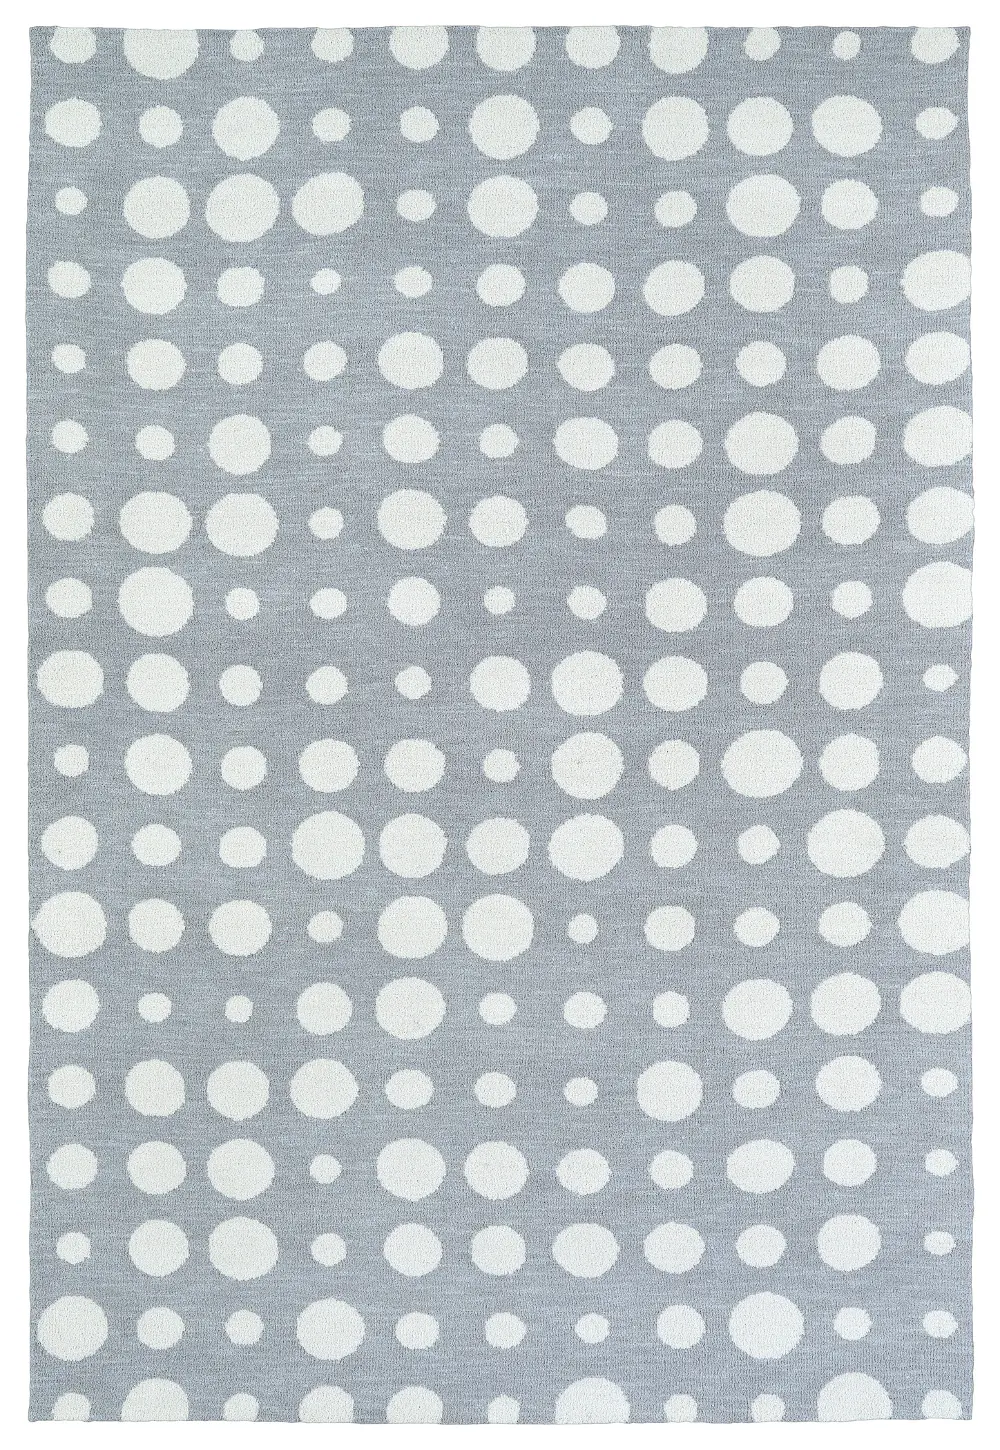 4 x 6 Small Dotted Gray and Ivory Area Rug - Lily & Liam-1